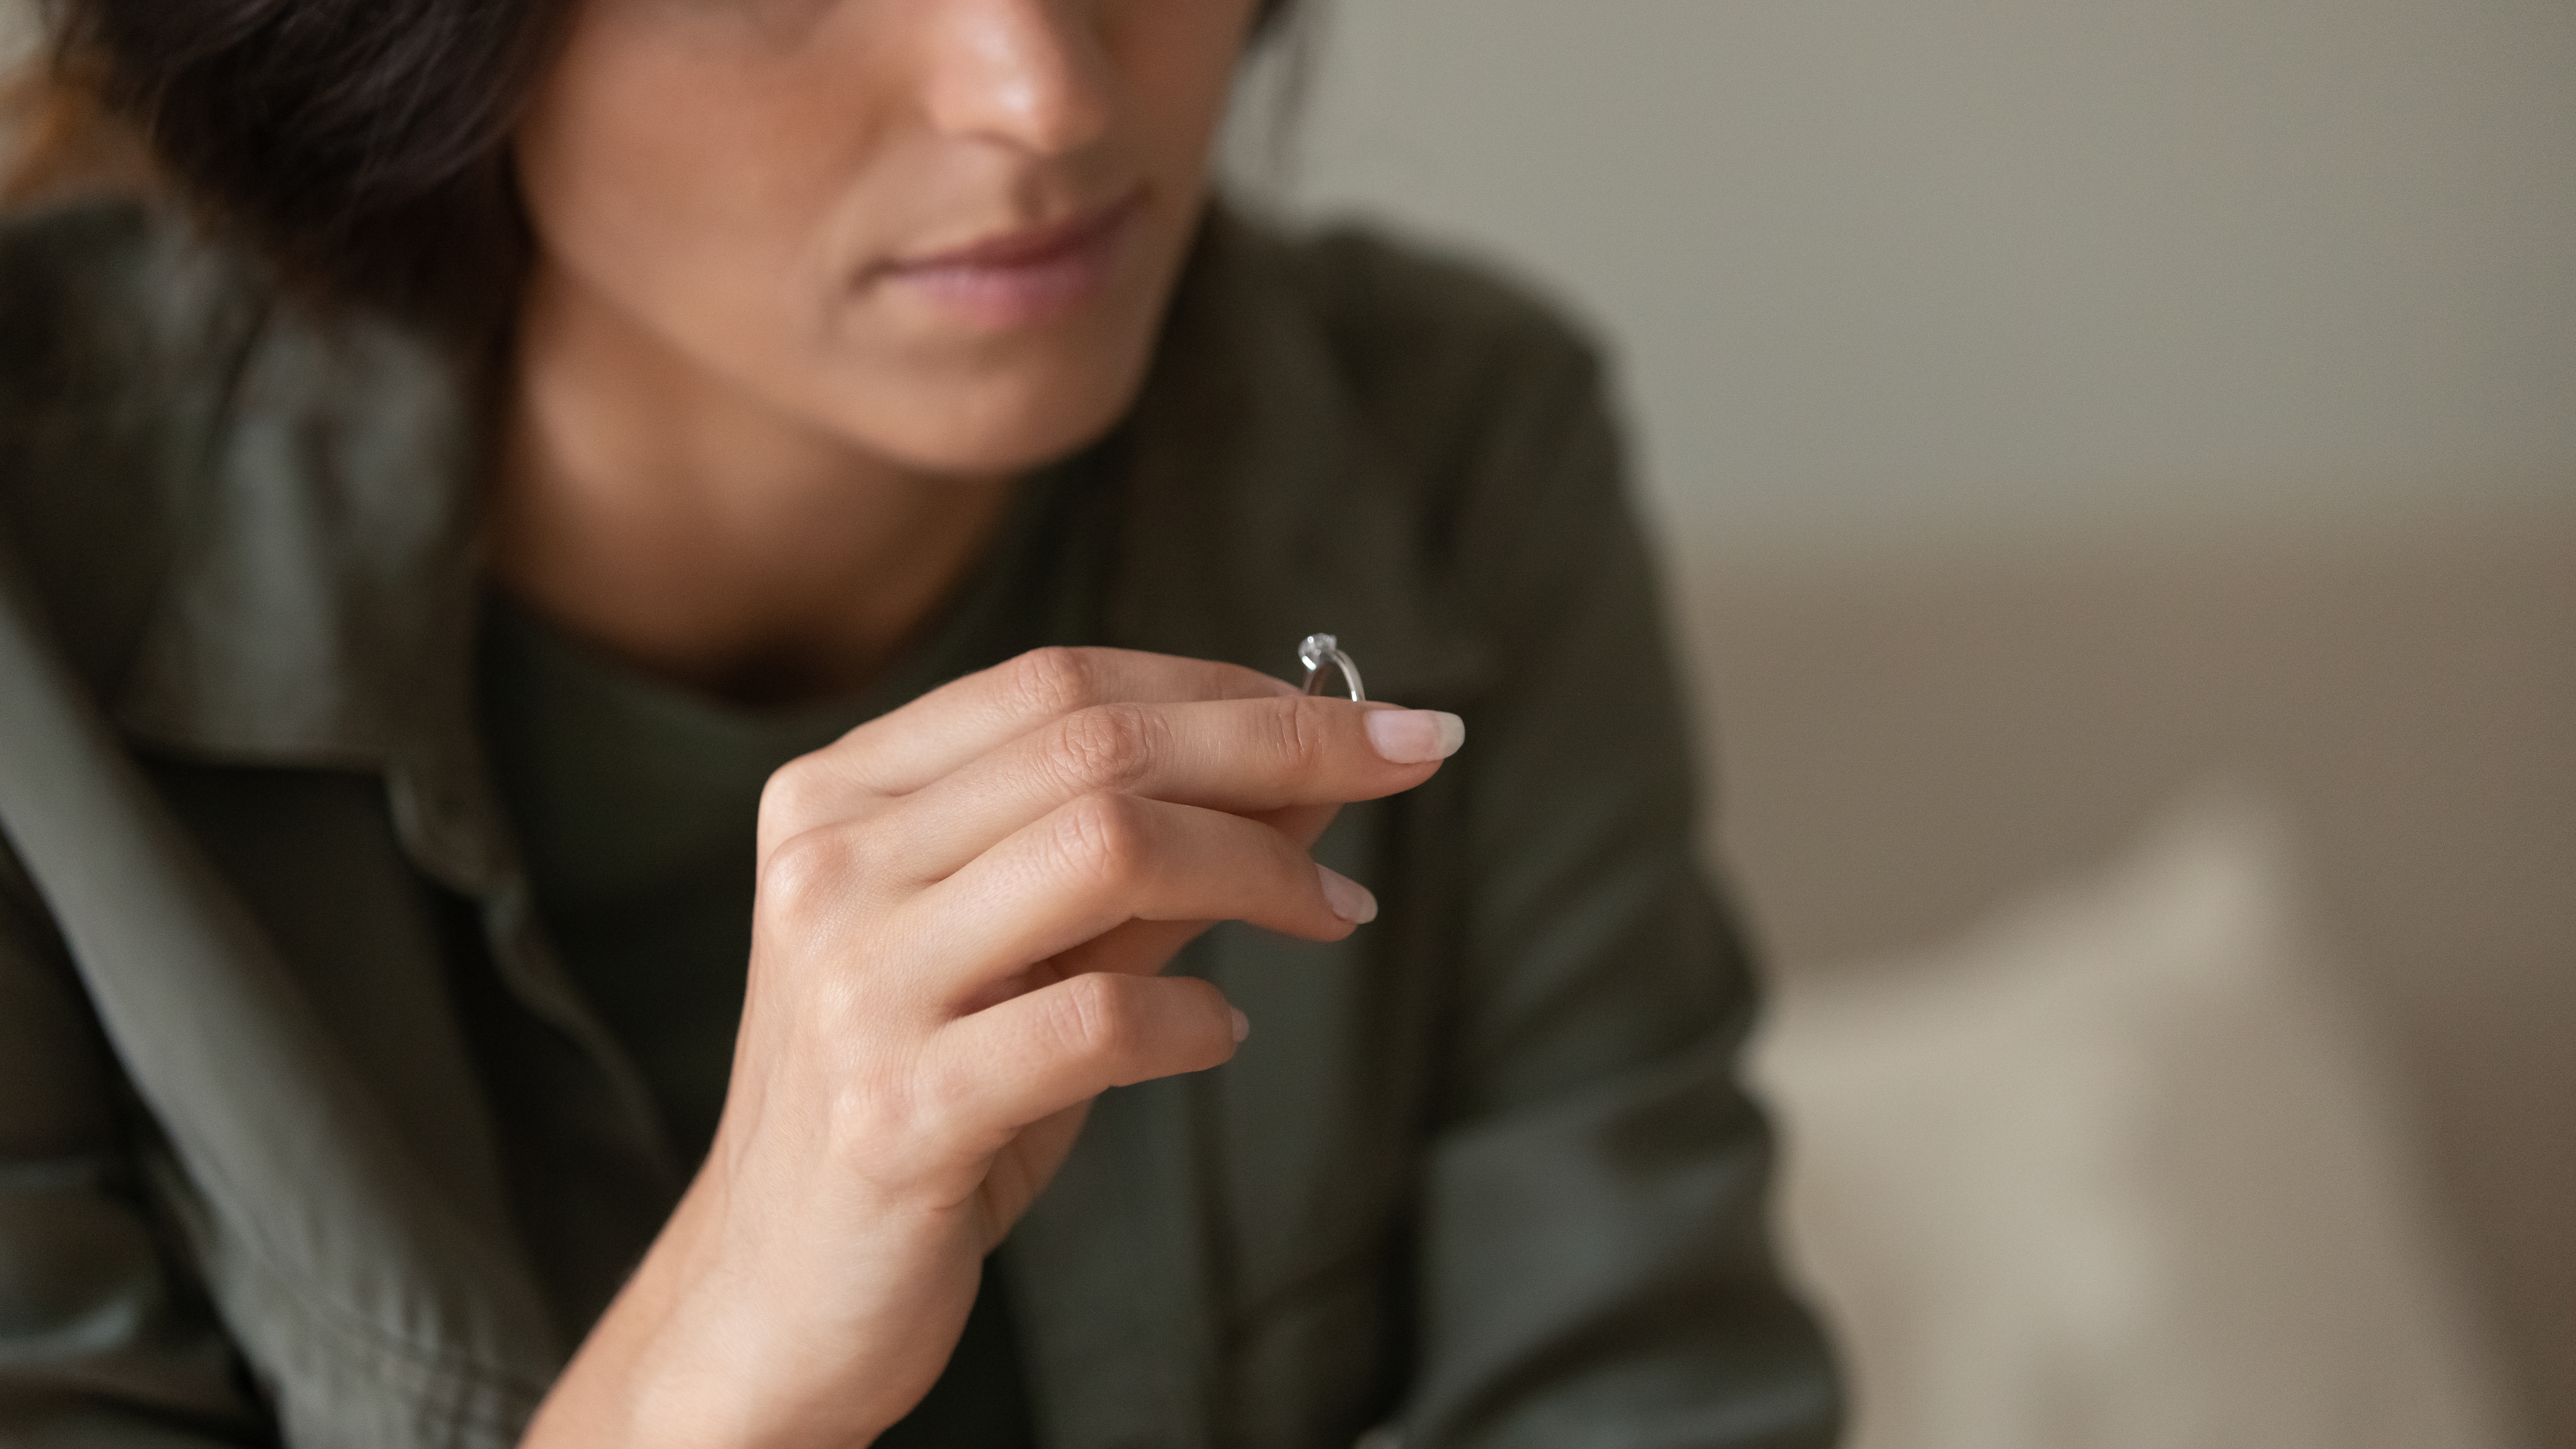 A woman looking sad while holding a ring | Source: Shutterstock